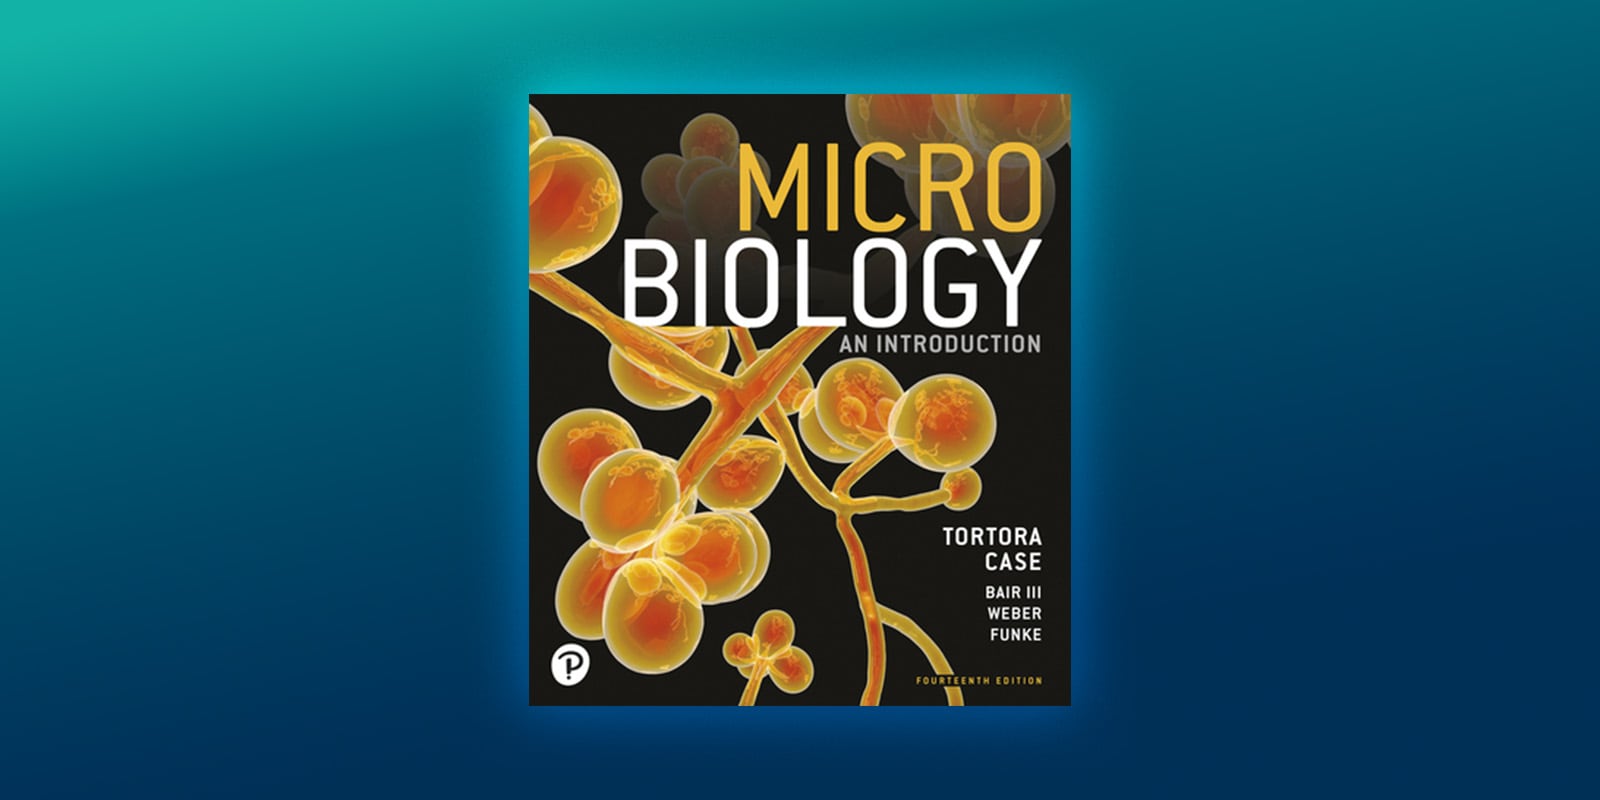 Microbiology: An Introduction book cover with the title and author names, Christine L. Case, Warner B. Bair, Derek Weber, displayed to the right. 